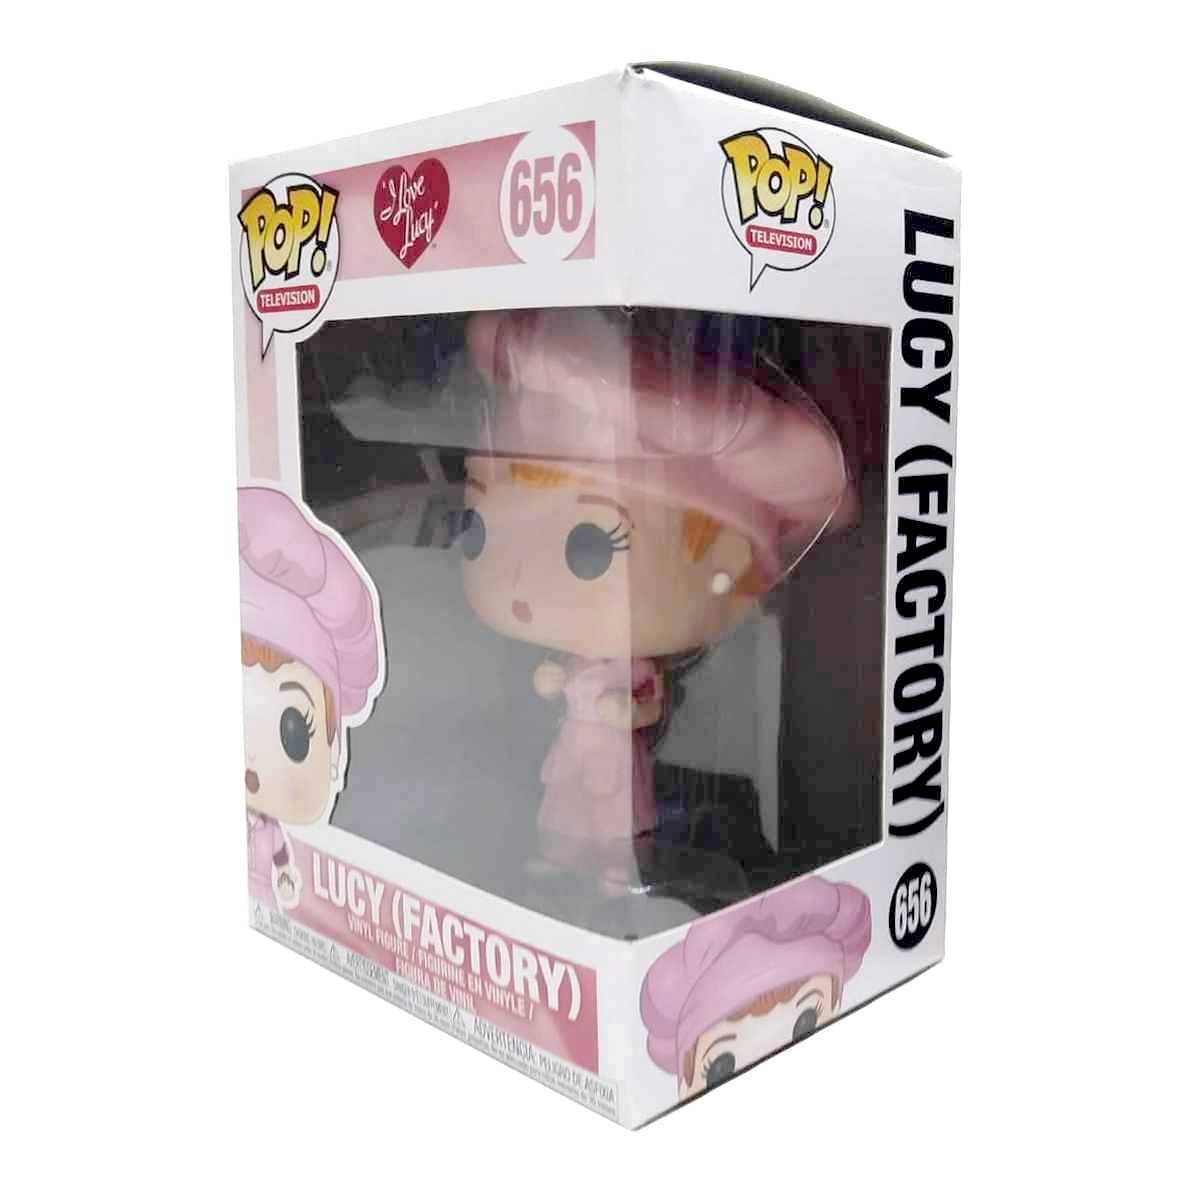 Funko Pop! Television I Love Lucy (Factory) vinyl figure número 656 Vaulted